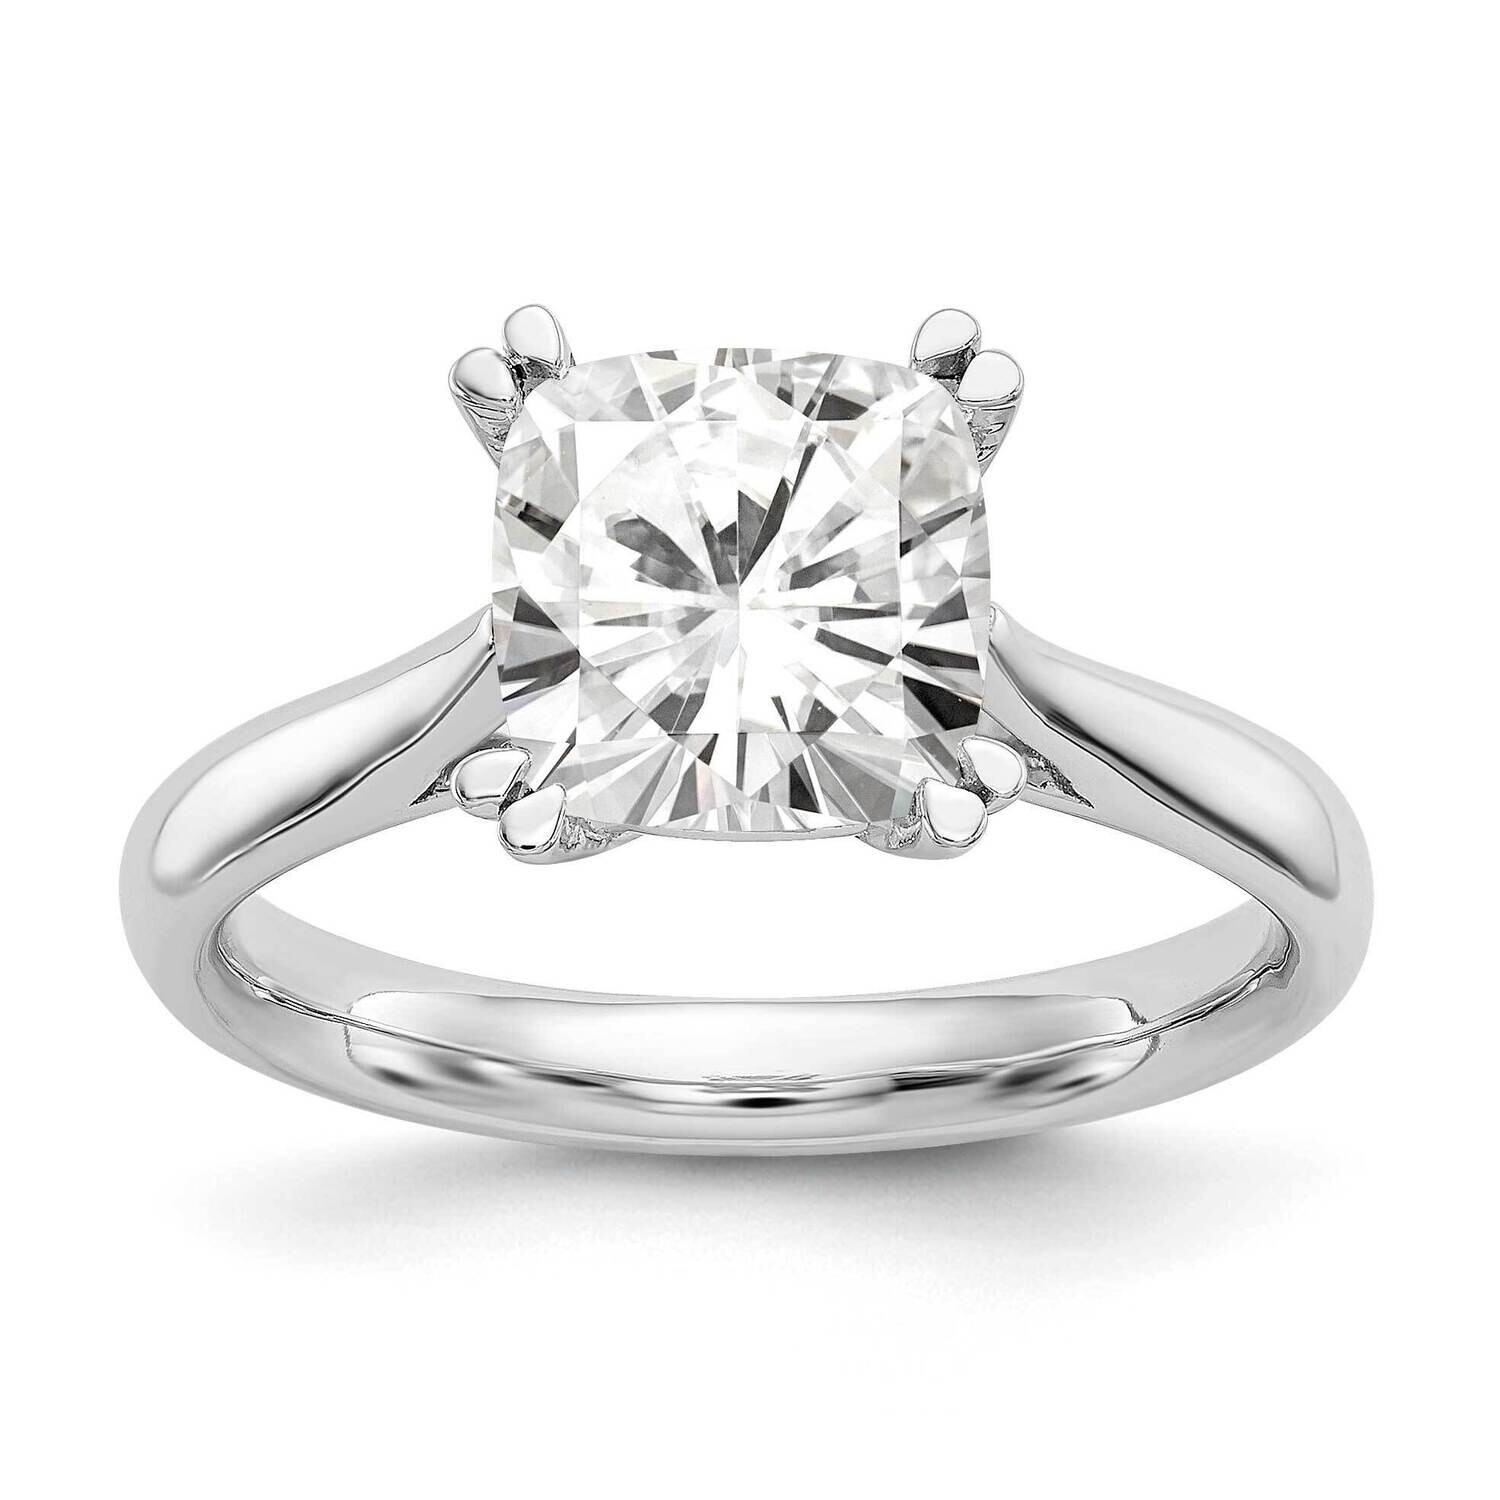 2.5 Carat 8.00mm 4-Prong Cushion-Cut Solitaire Engagement Ring Mounting 14k White Gold RM1963E-250-CWAA